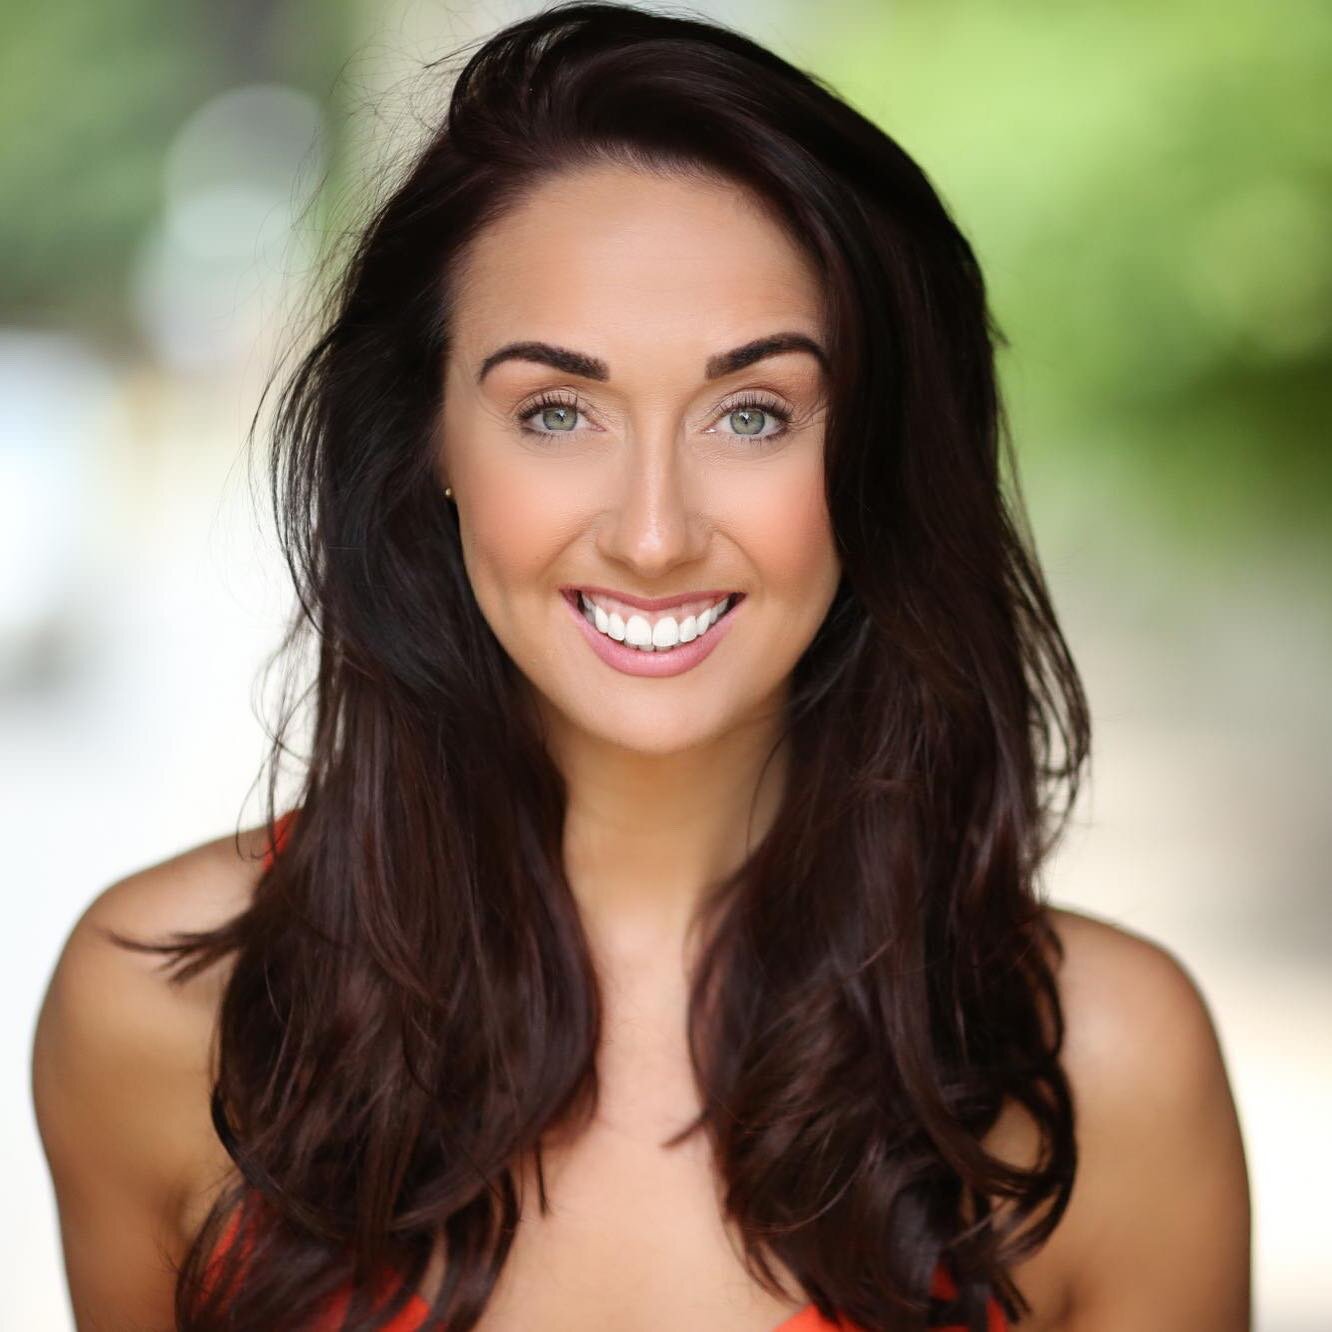 Introducing the sensational, Lisa Mathieson (she/her)!

Lisa is currently playing the Flamenco singer in Mrs Doubtfire at The Shaftesbury Theatre, London. @lisamathieson is also the UK Associate Choreographer on the show and was Associate Choreograph